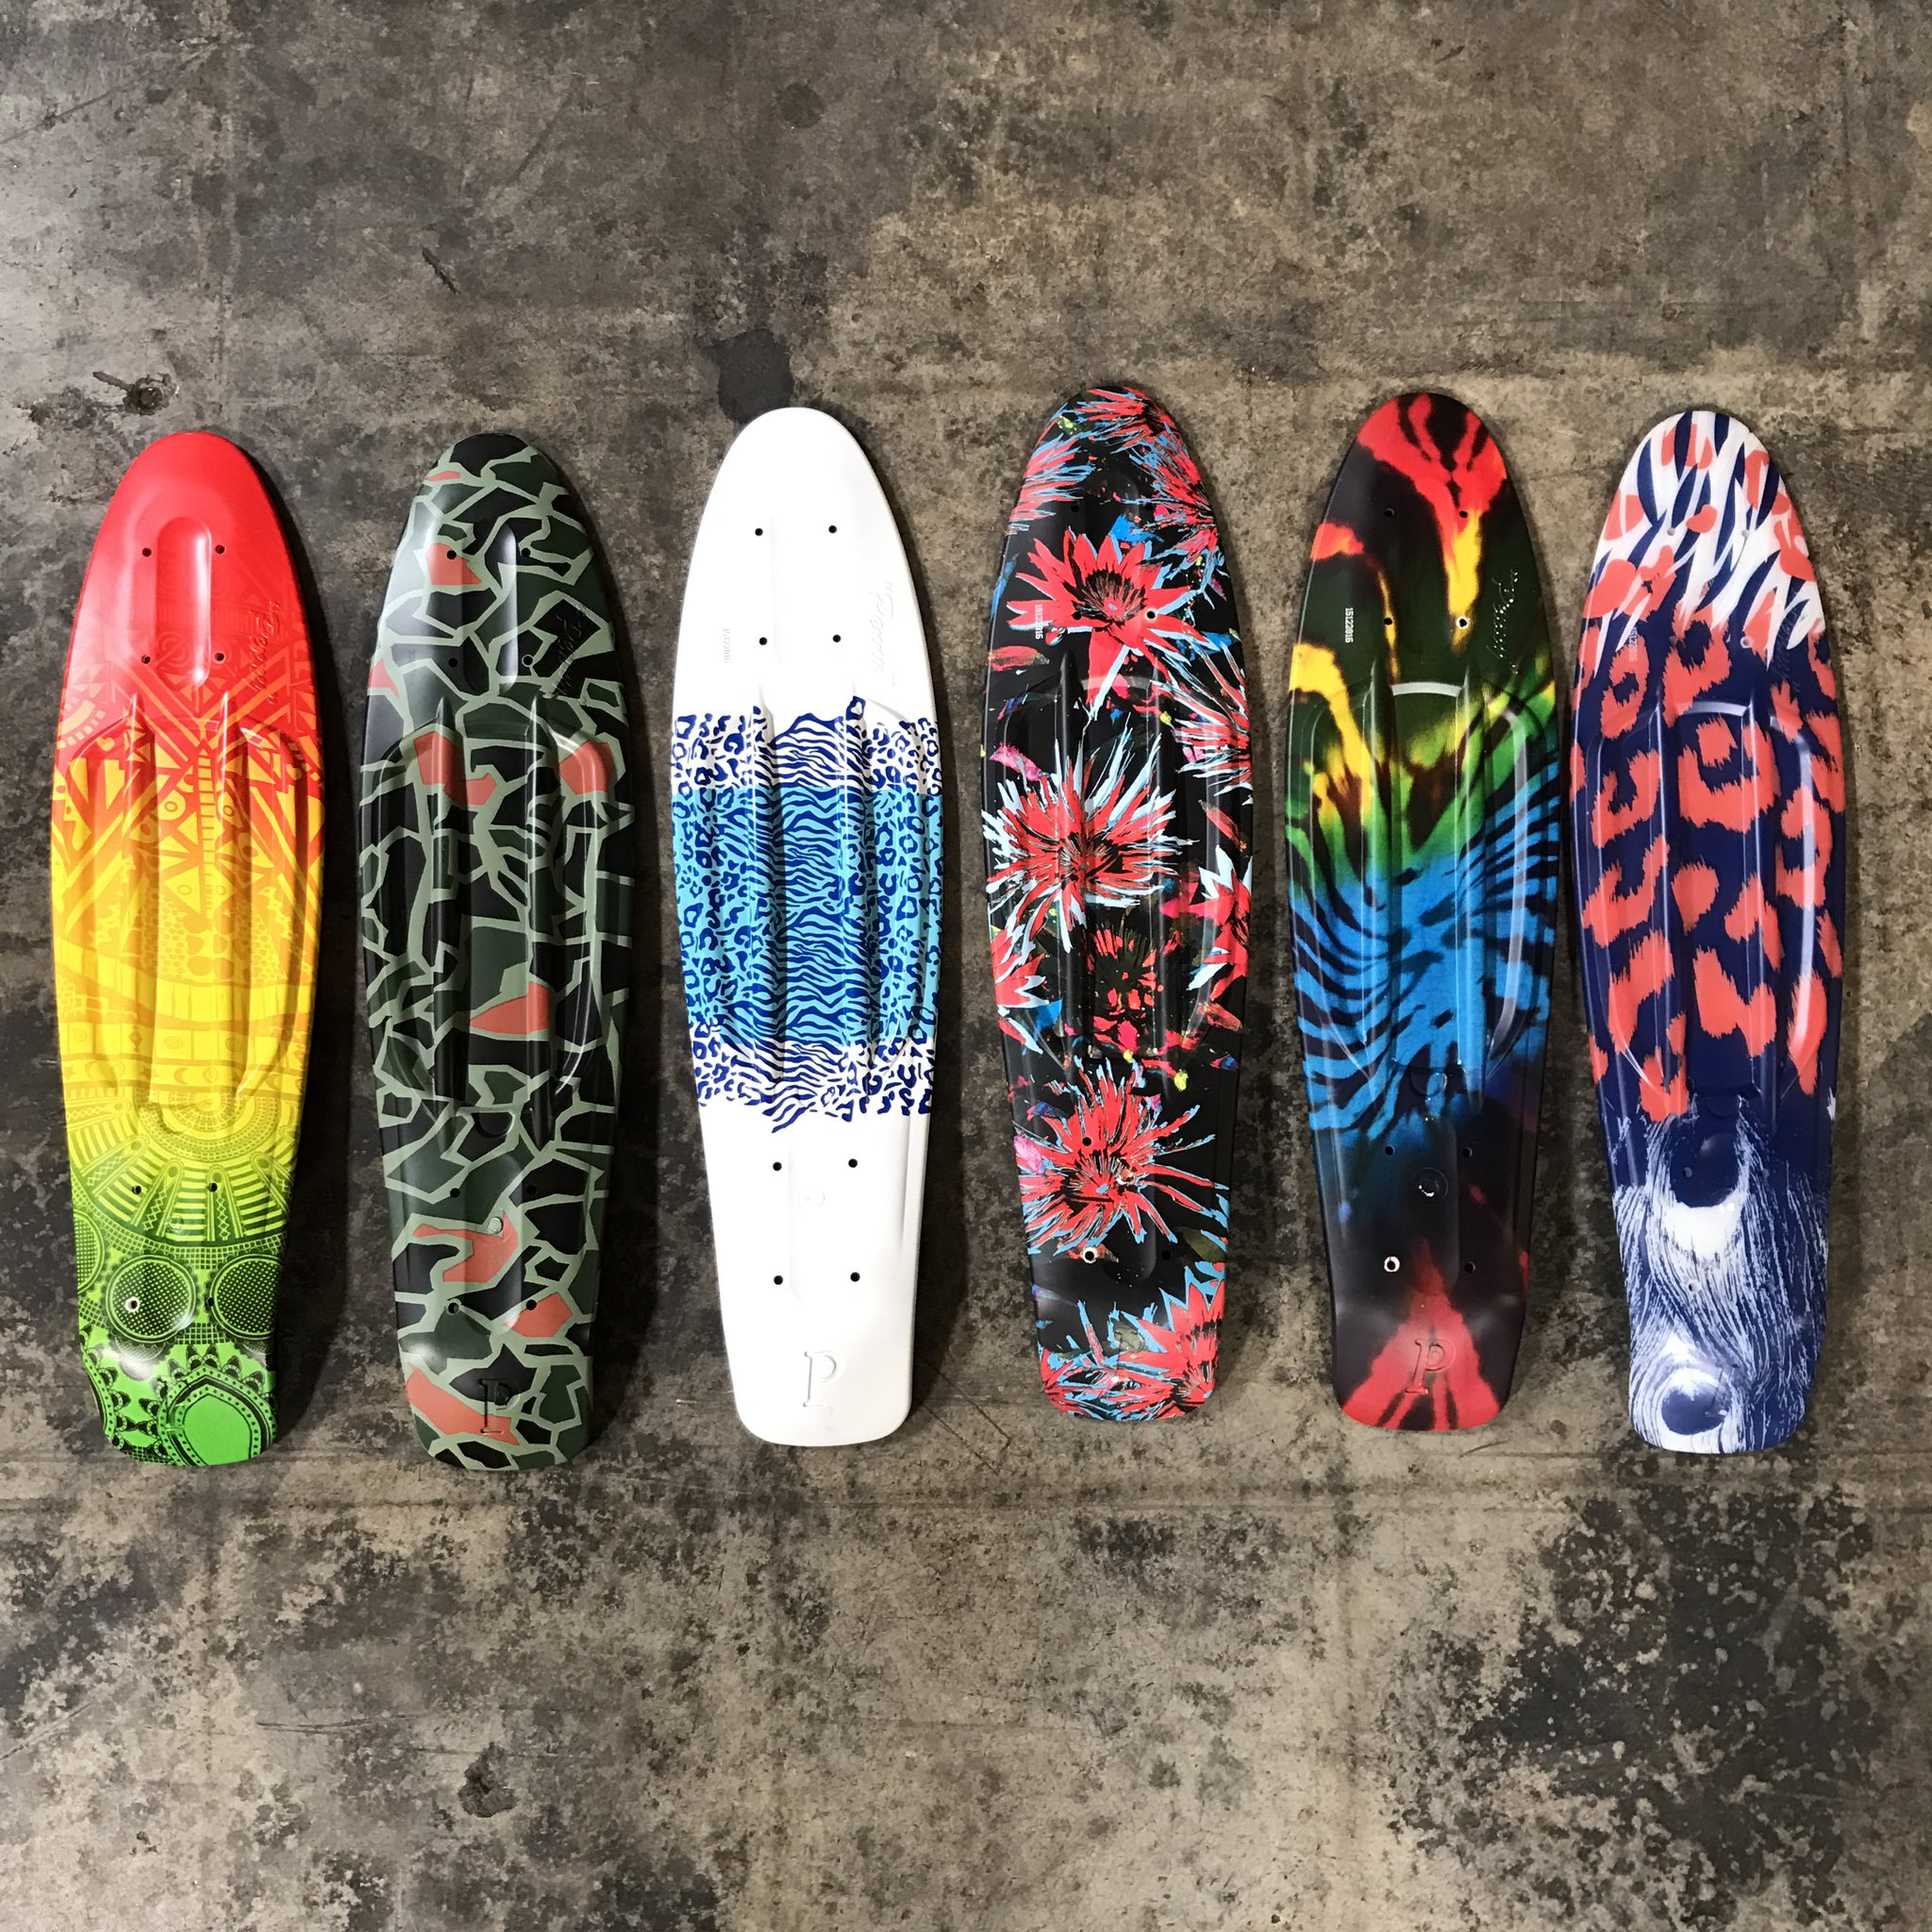 Penny Skateboards on Twitter: "⚡️Build your board⚡️New range graphic decks have hit the 3D customizer. Get to building! https://t.co/L54GHDyOgz https://t.co/HXw2O67VU2" / Twitter